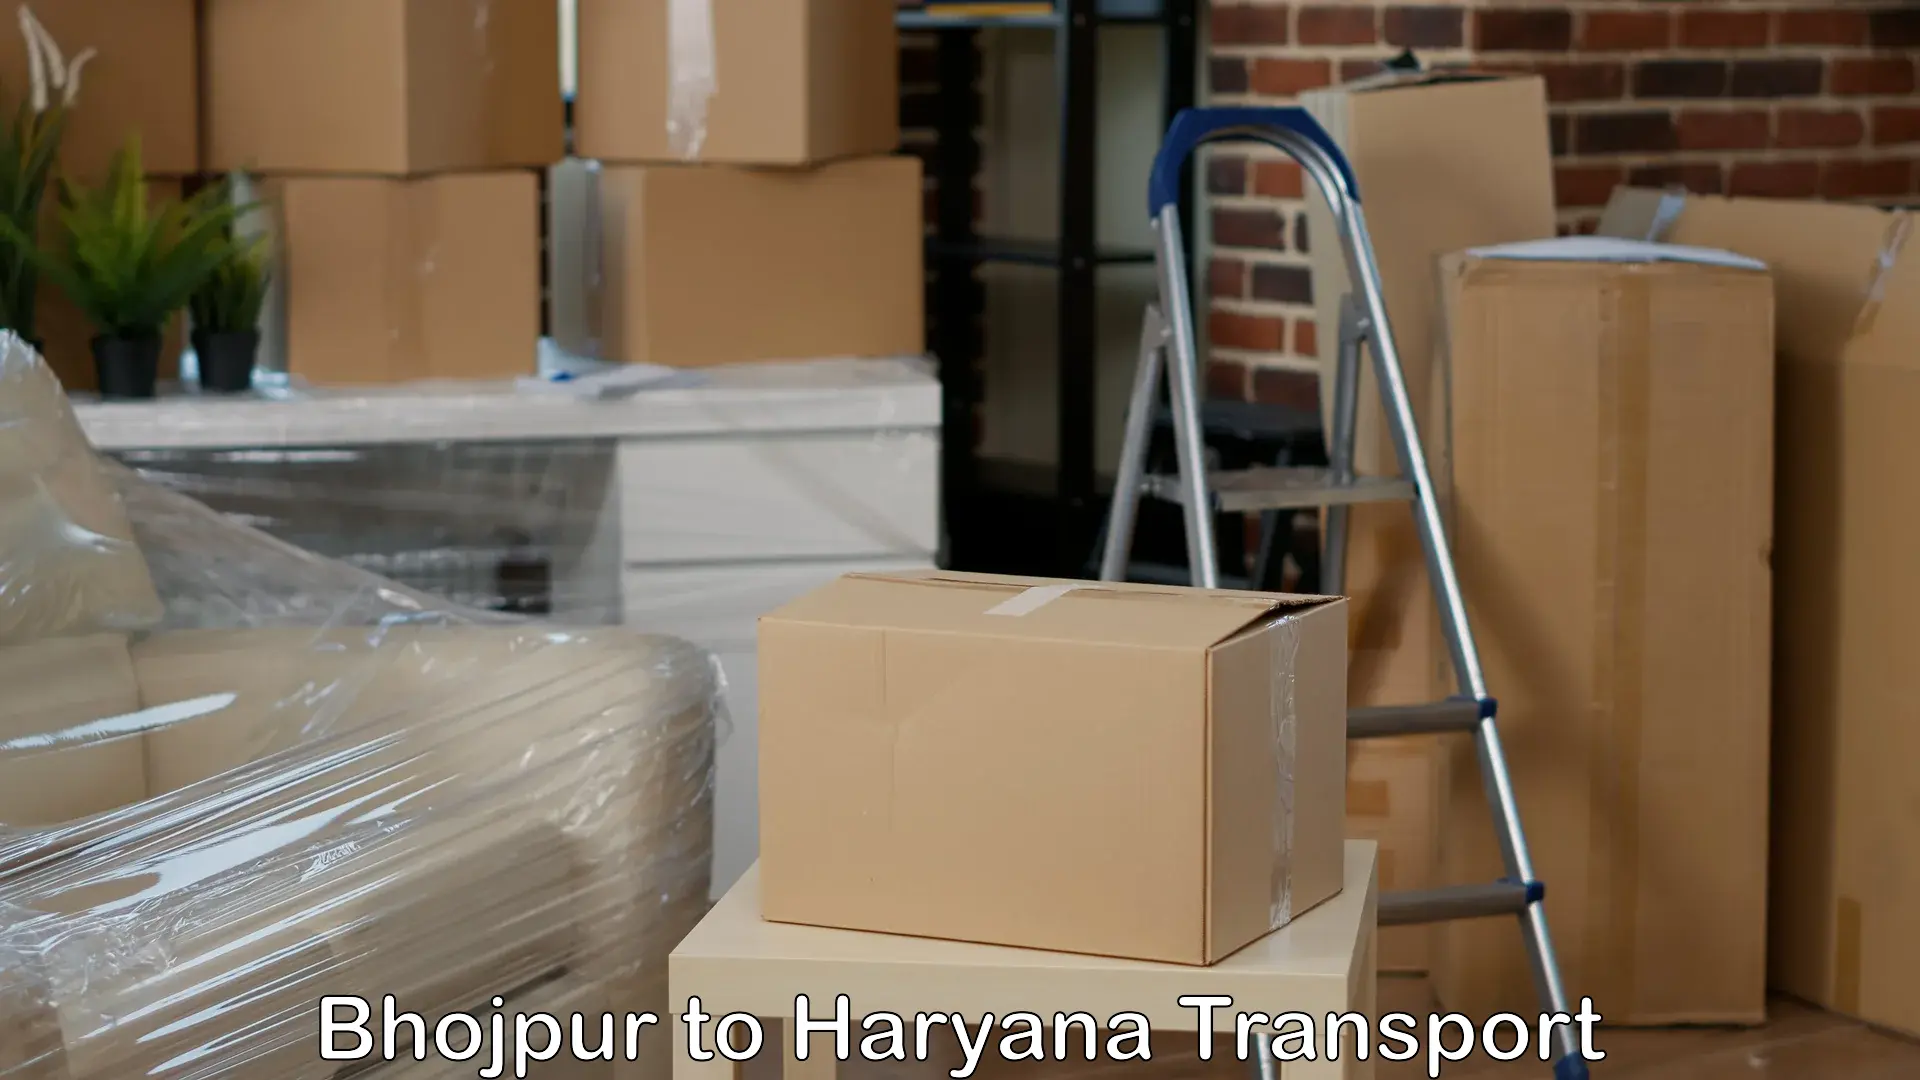 Road transport online services Bhojpur to Faridabad